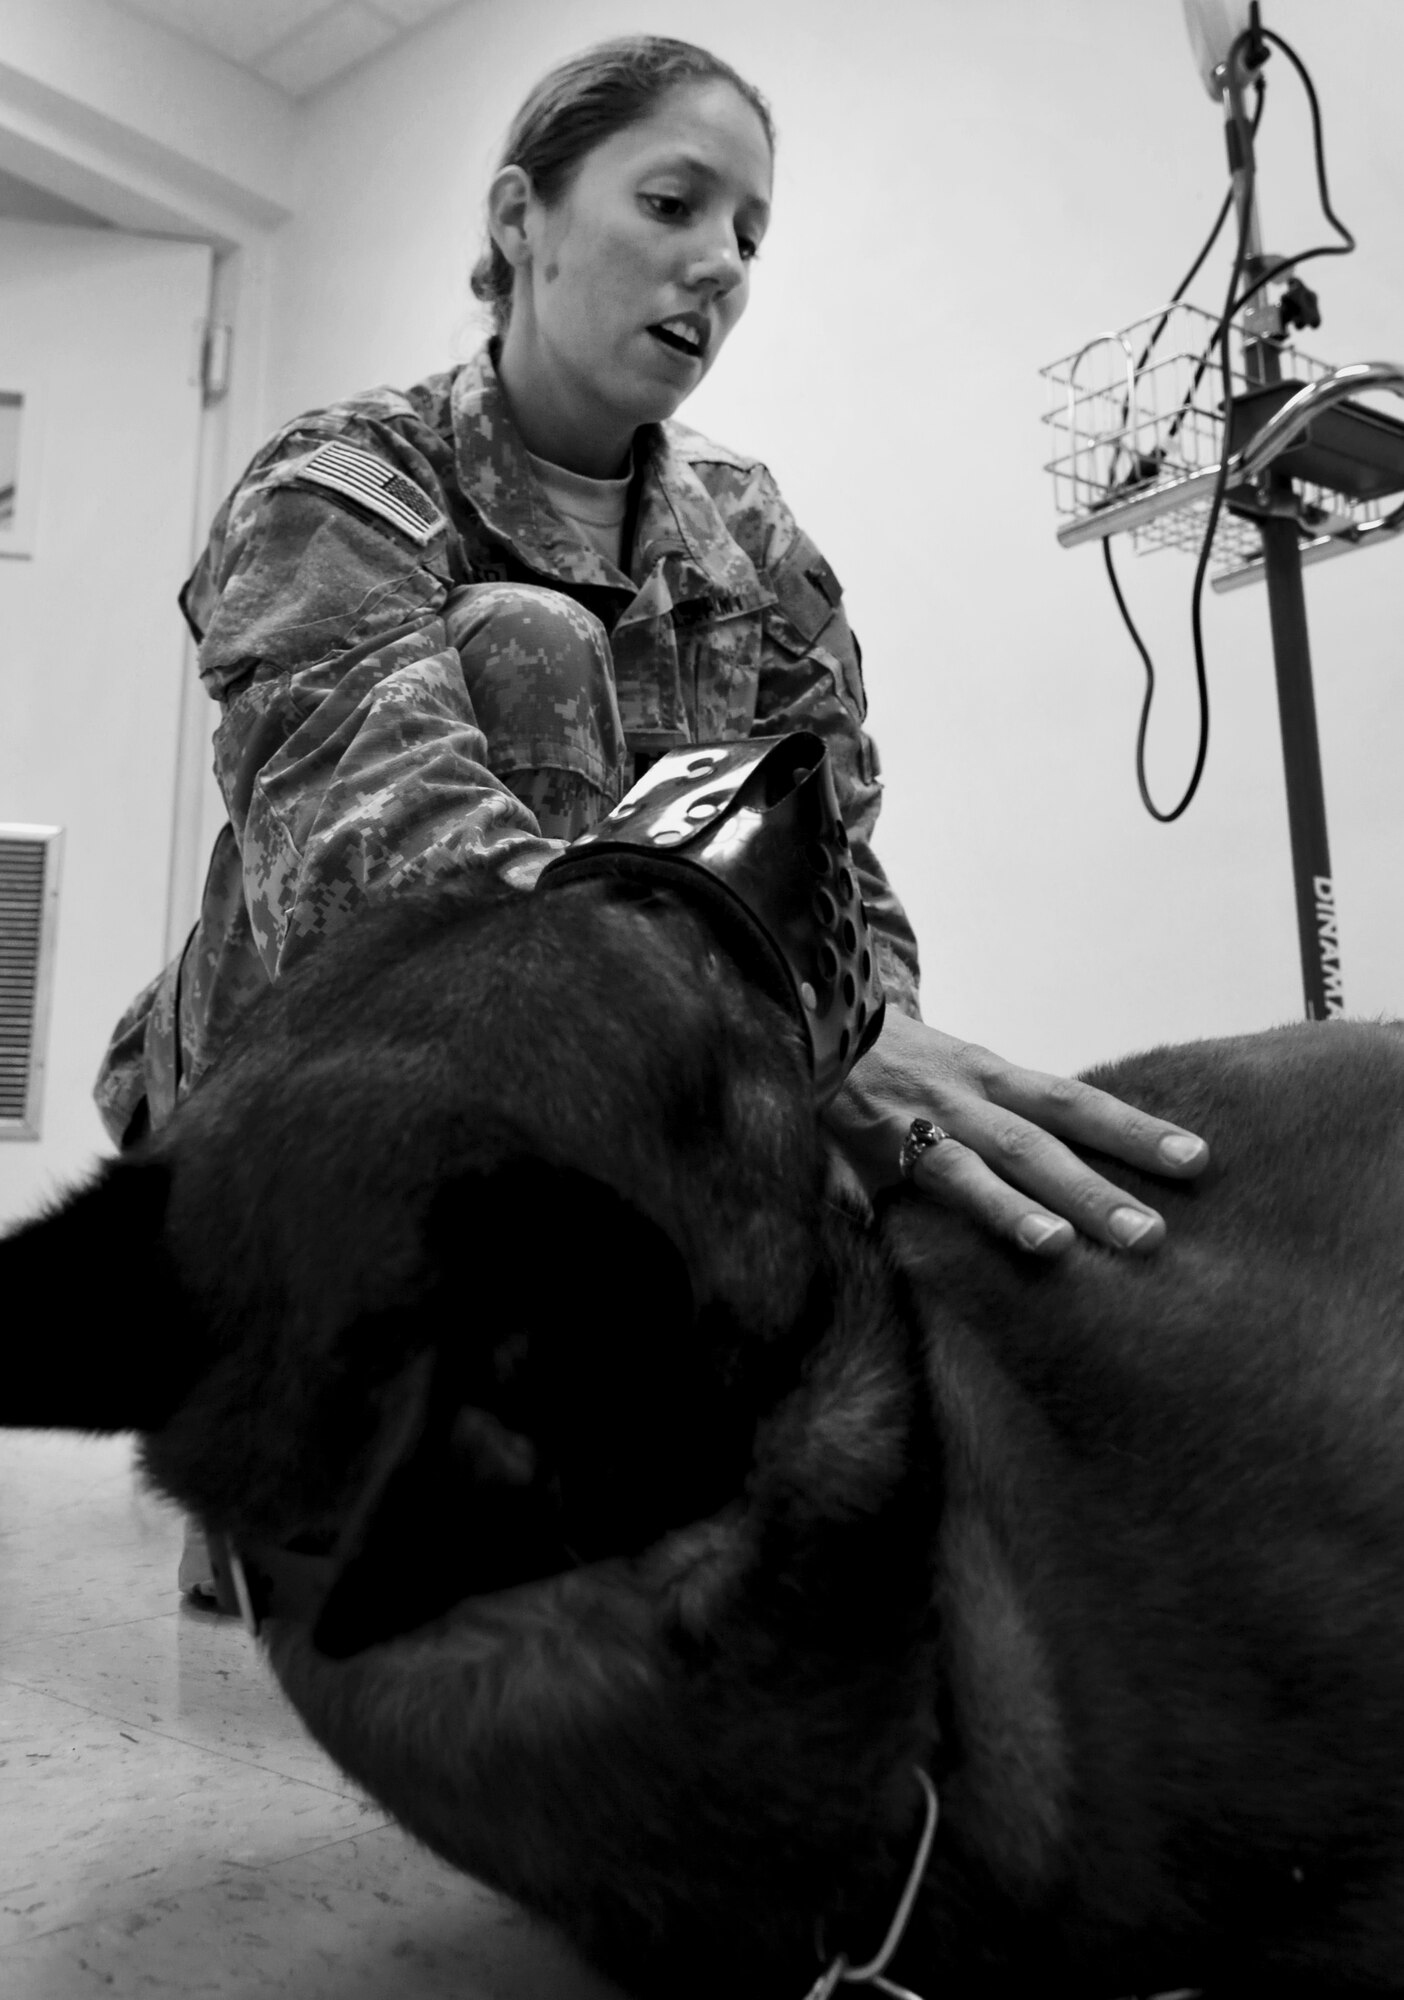 ANDERSEN AIR FORCE BASE, Guam—U.S. Army Capt. Angelina Gerardo, Public Health Command District Western Pacific veterinarian, gives a check-up to Carlos,  a military working dog assigned to the 36th Security Forces Squadron, during a revisit here Aug. 17. Carlos had to come back in to have sutures removed and for a routine visit to the veterinarian. (U.S. Air Force photo by Senior Airman Benjamin Wiseman/Released)
